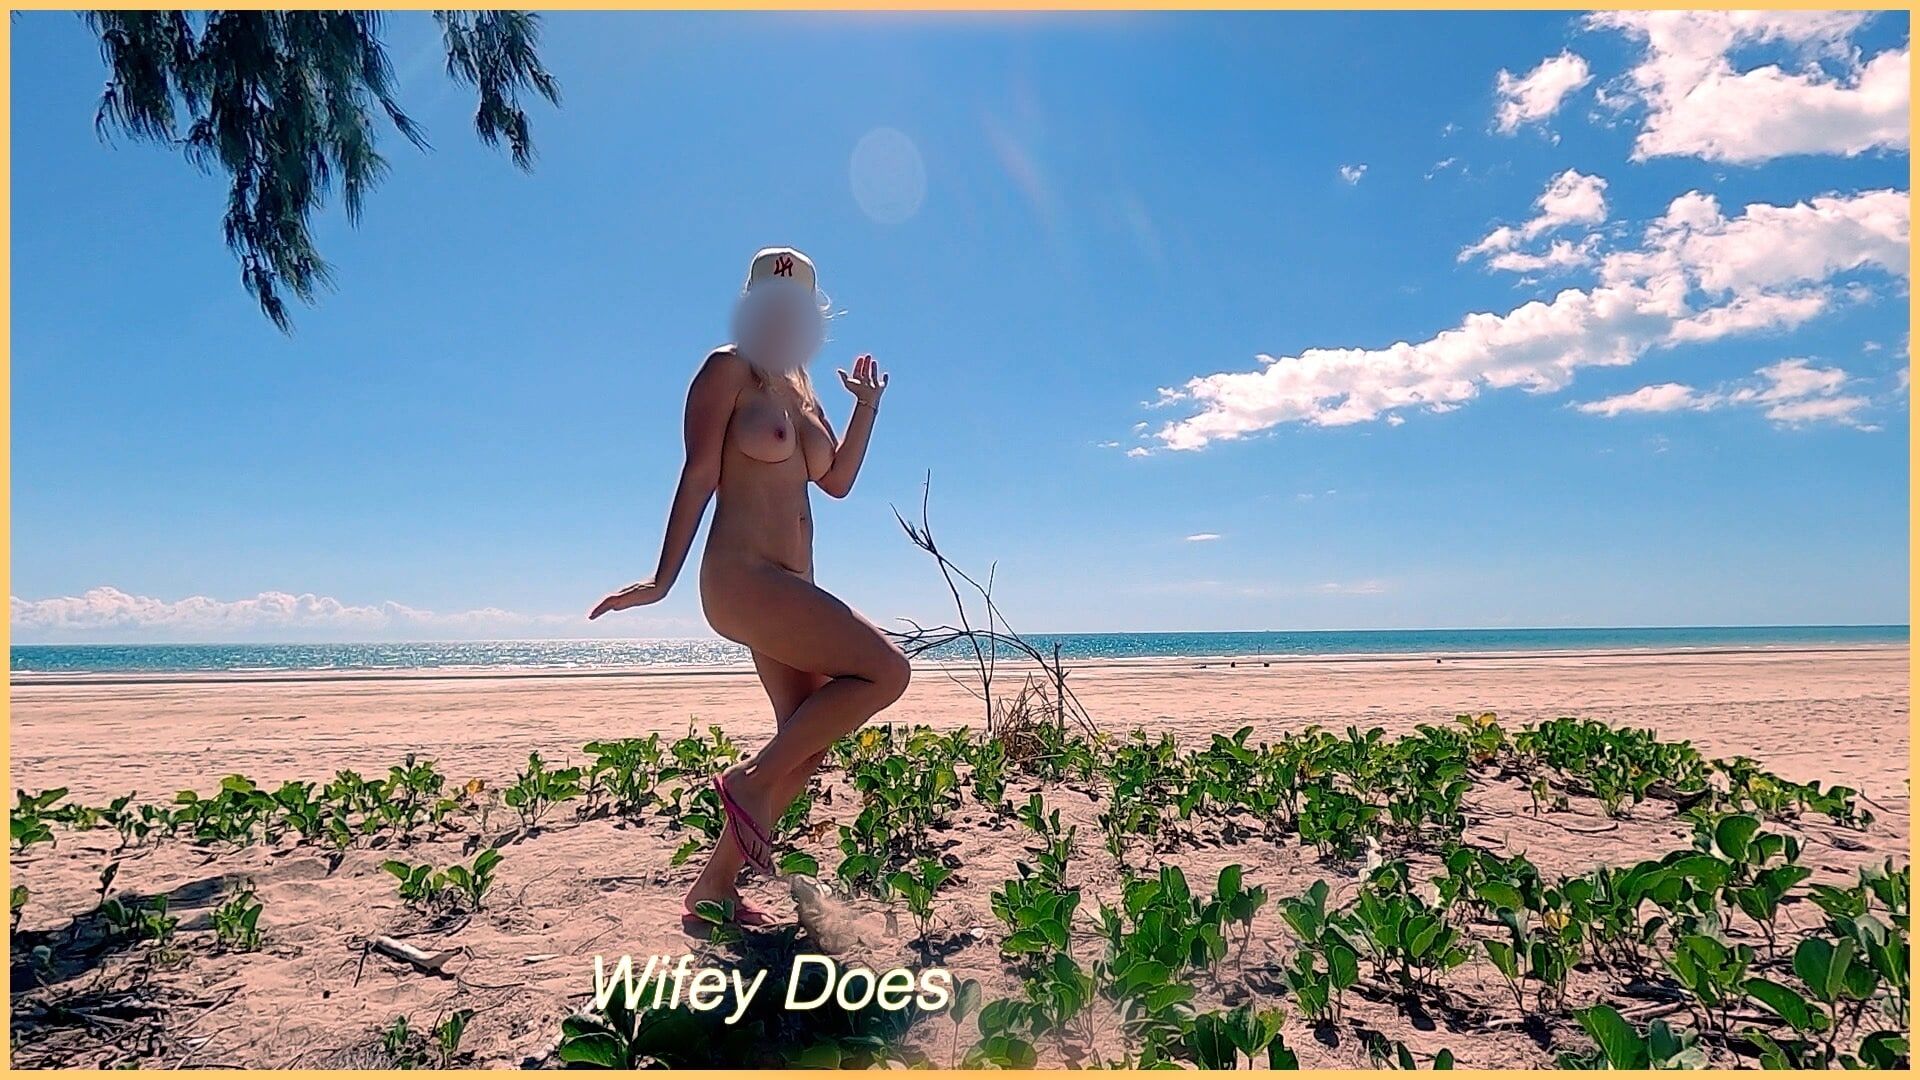 Wifey goes dancing nude at a public beach #10